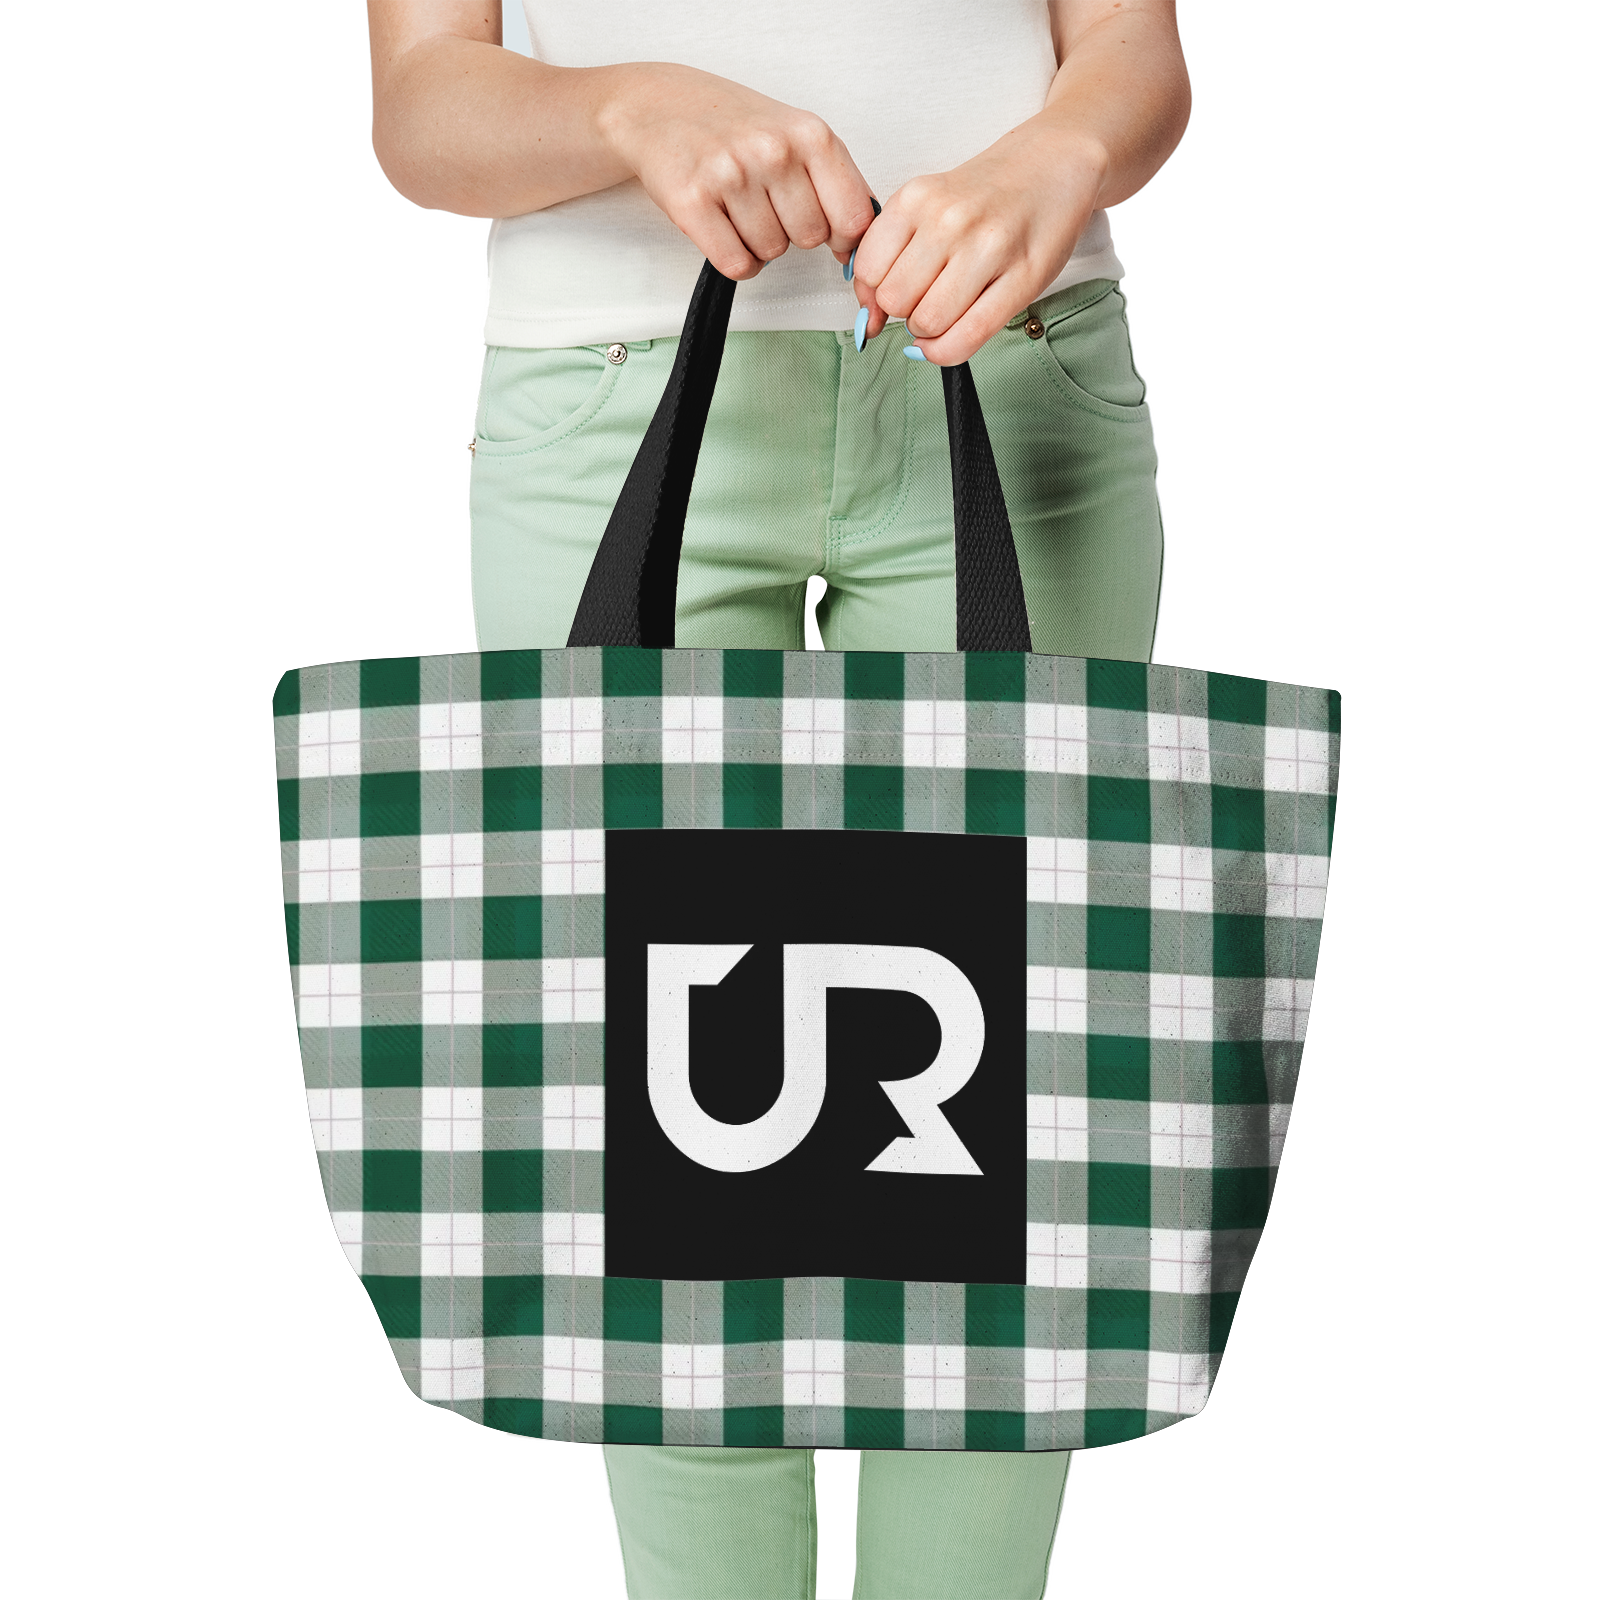 Heavy Duty and Strong Natural Cotton Canvas Tote Bag - UGO ROMANO URTB030